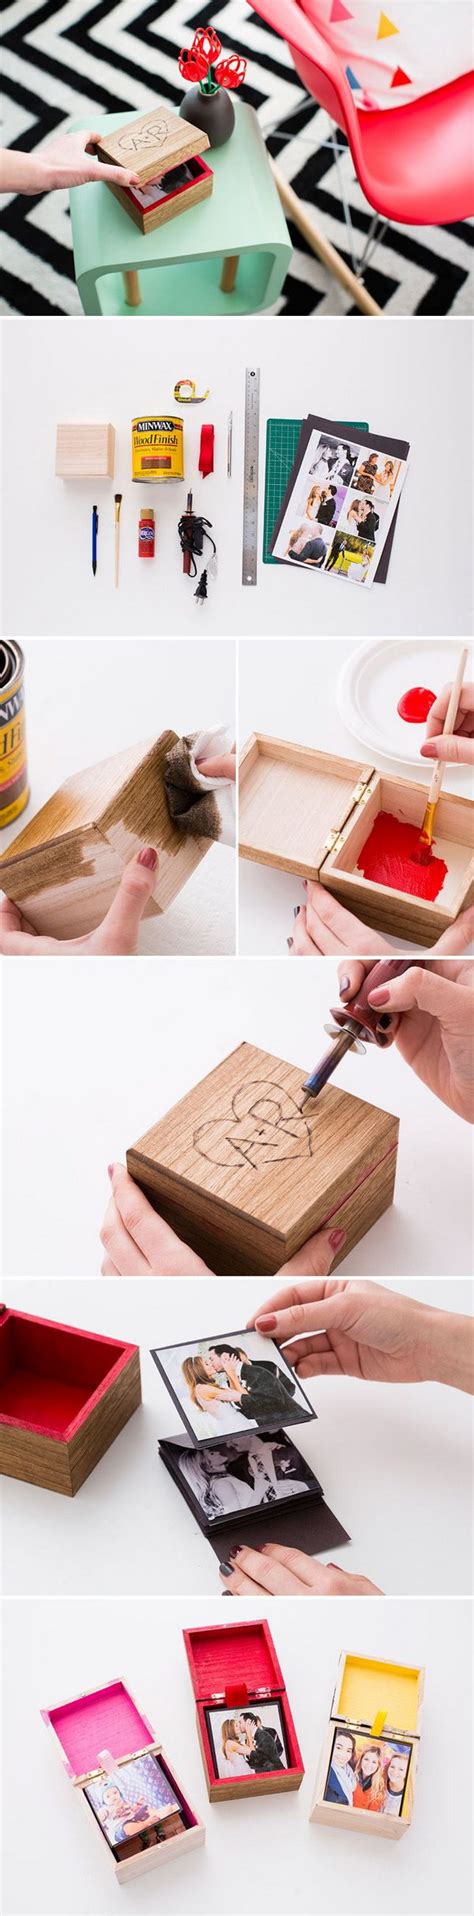 These are the perfect gifts for events like valentines day, an anniversary or just because 🙂 25+ DIY Gifts for Him With Lots of Tutorials